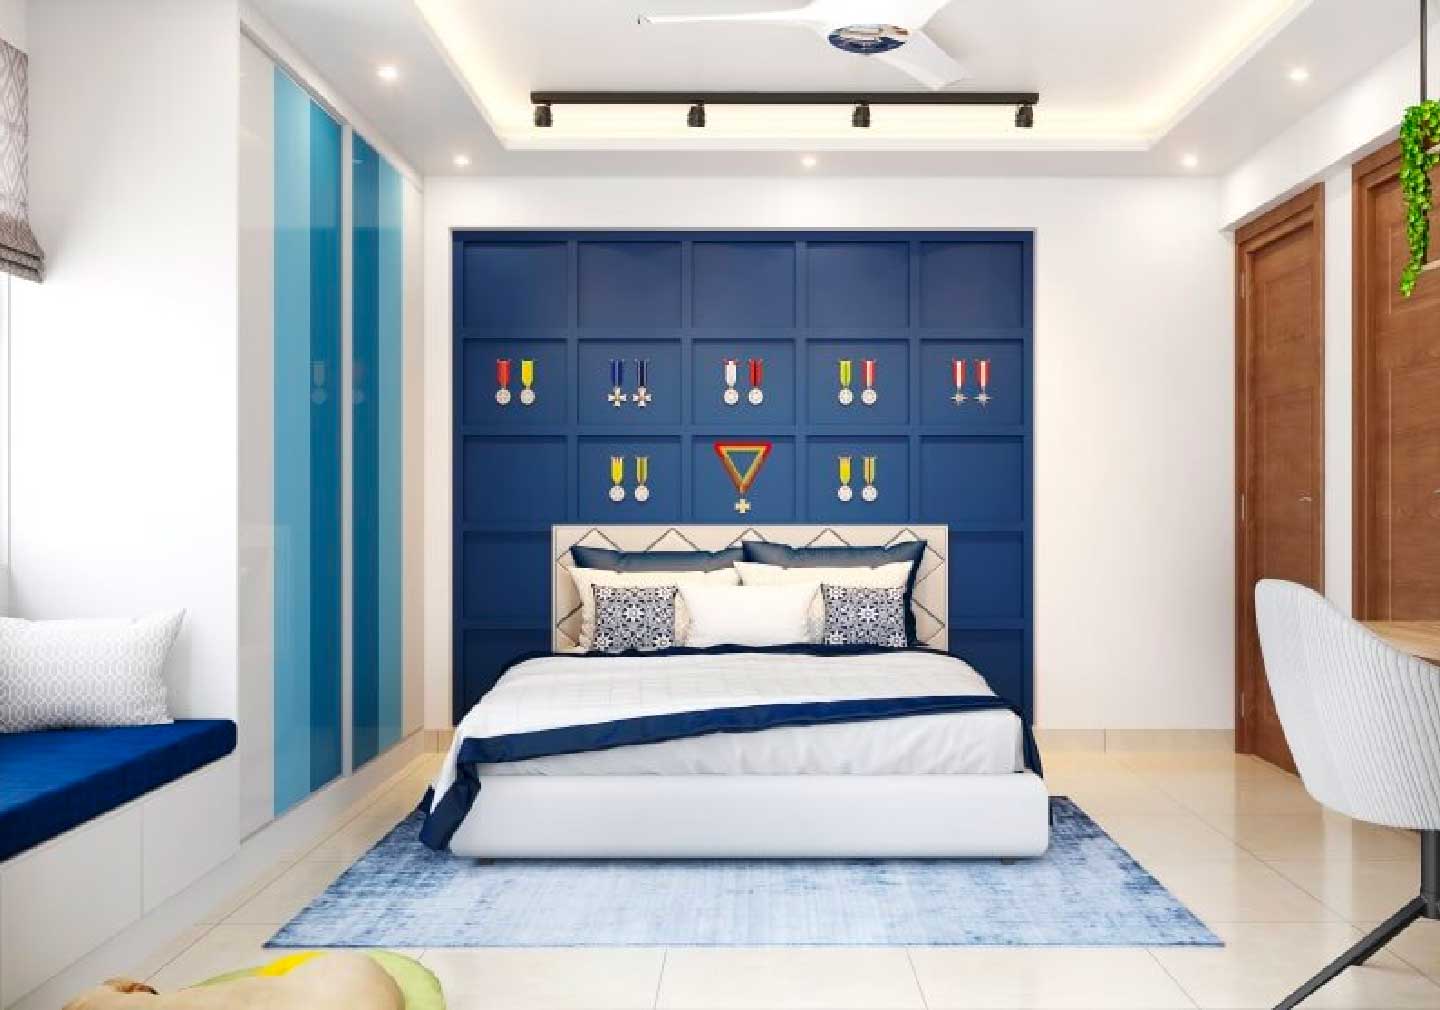 Tips to choose the right interior colours for your bedroom